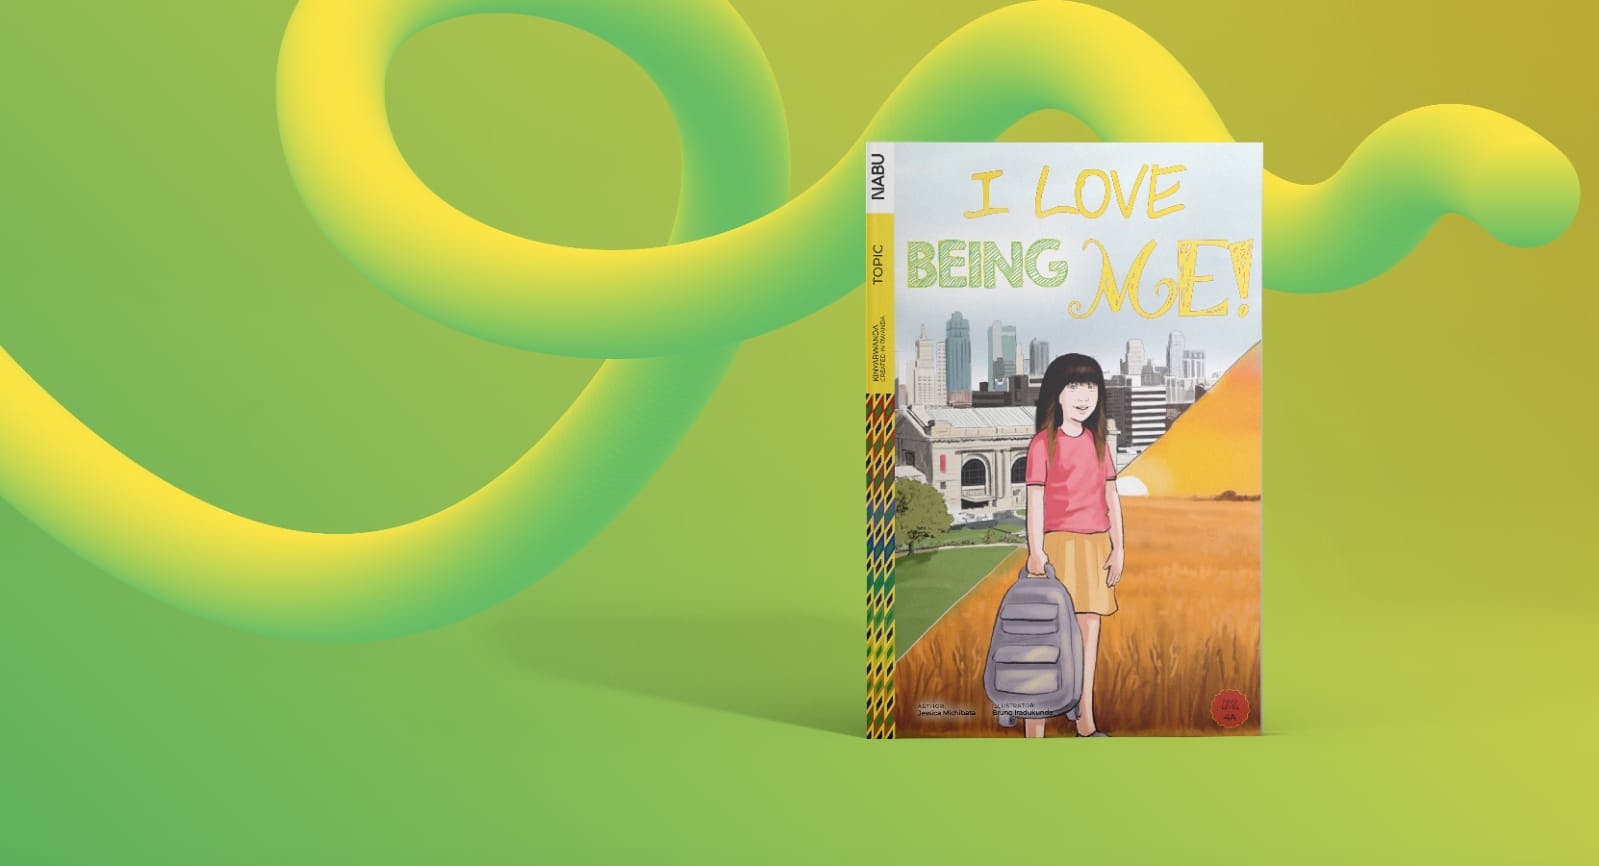 NABU: NABU Publishes “I Love Being Me!” A must read story for every child about belonging and self love.